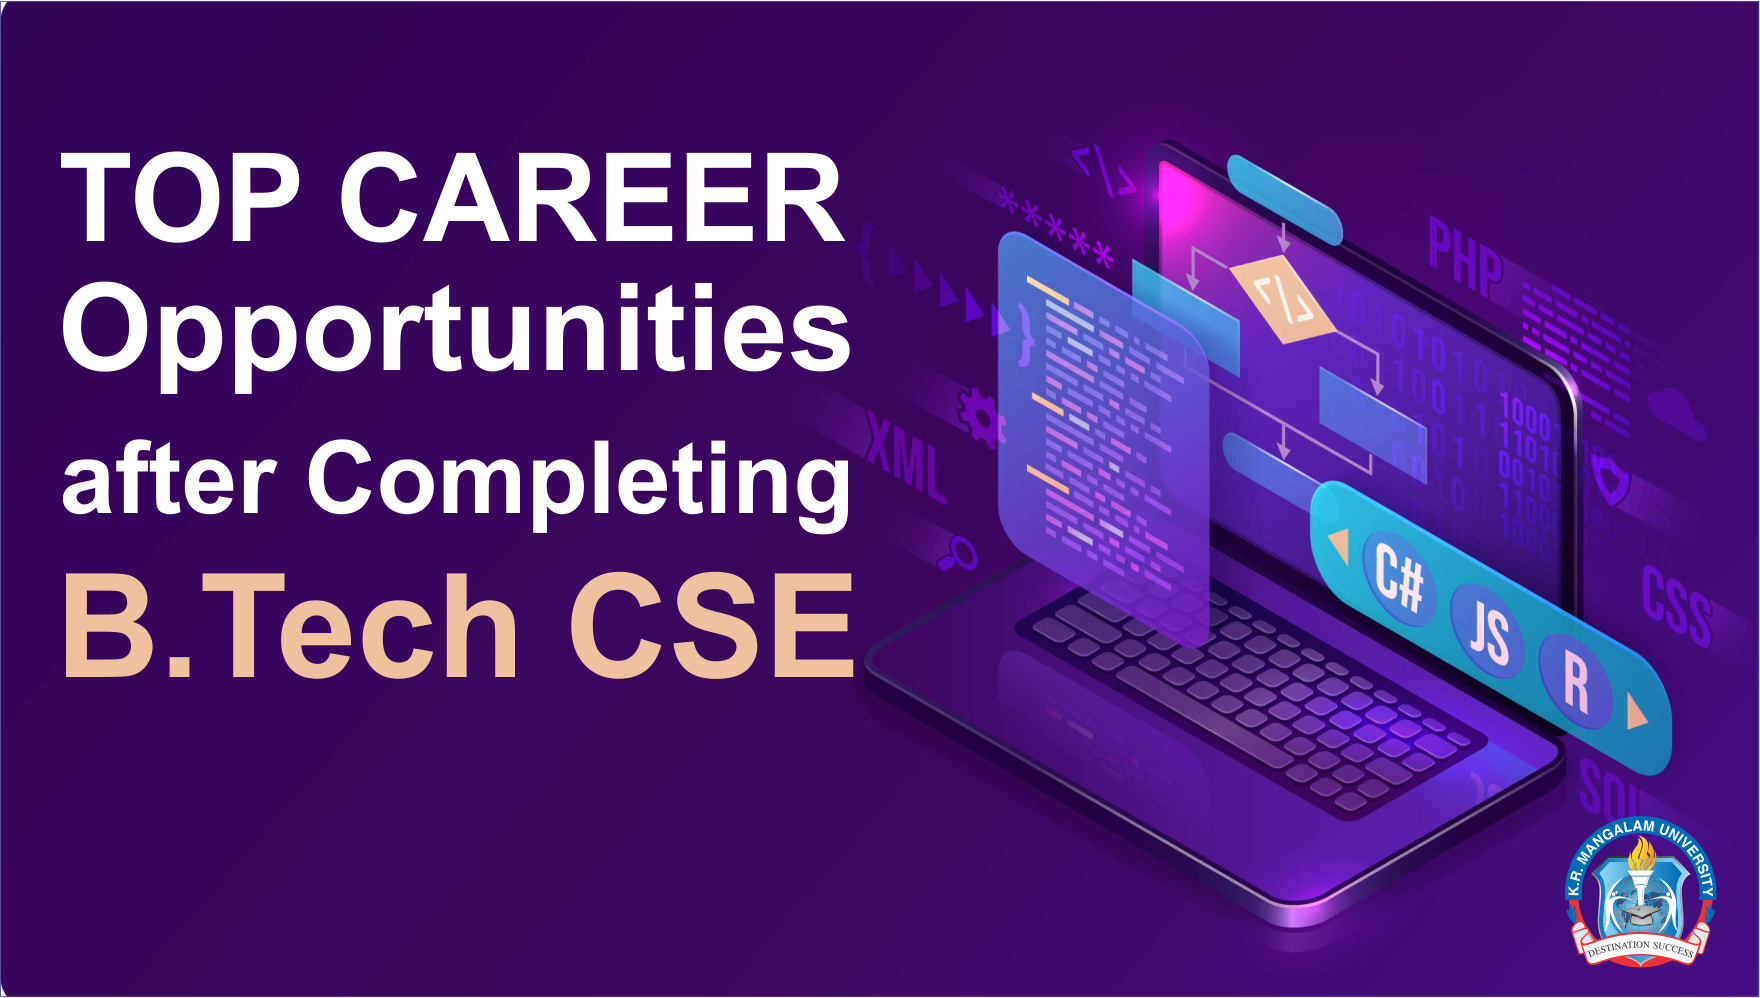 B Tech CSE or B Tech IT: Which is the Better Course to Pursue - Blog